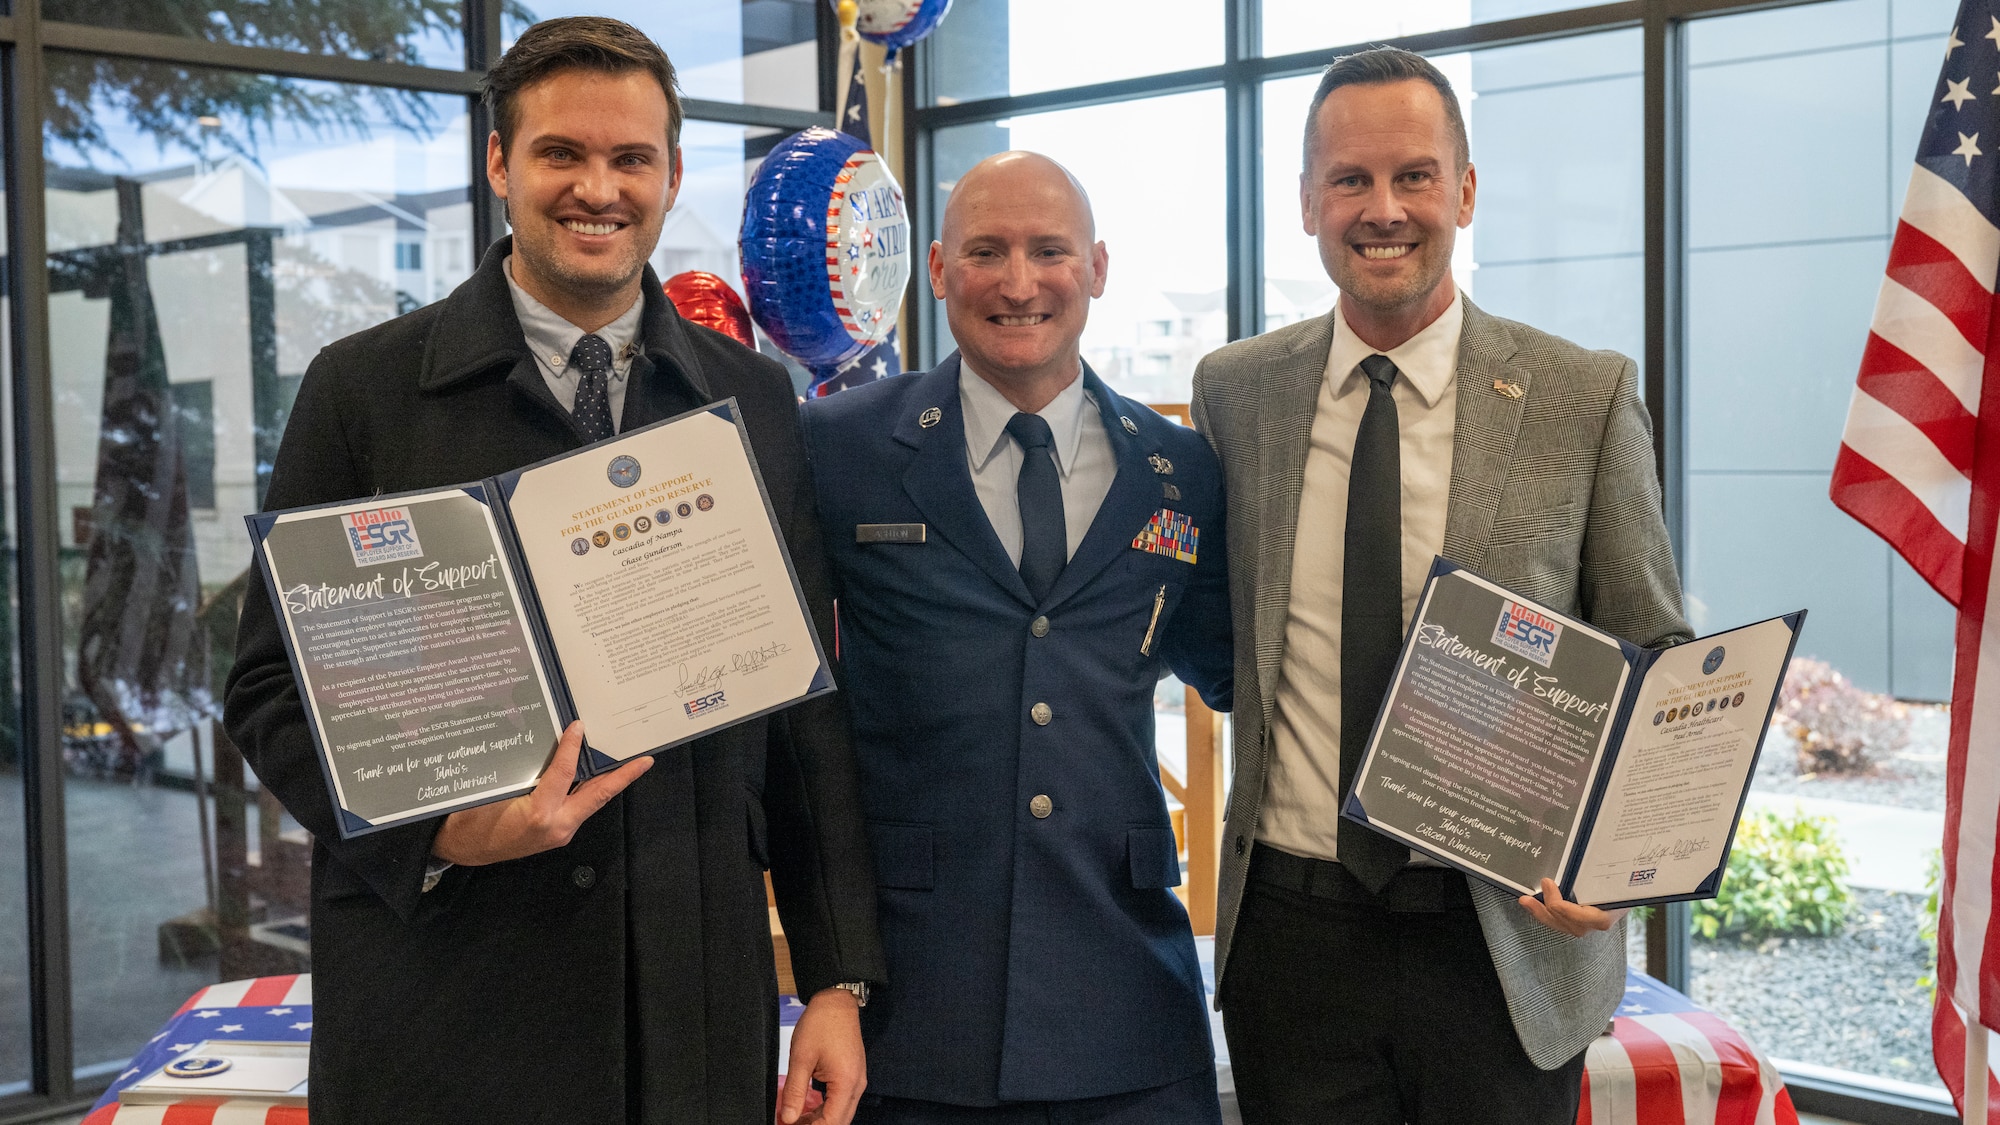 From left to right, Chase Gunderson, executive director of Cascadia of Nampa, Tech. Sgt. Mike Ashton, a commander support staff Airman with the 124th Fighter Wing, and Paul Arnell, president of Cascadia of Nampa, pose for a photo after an Employer Support of the Guard and Reserve Patriot Award ceremony